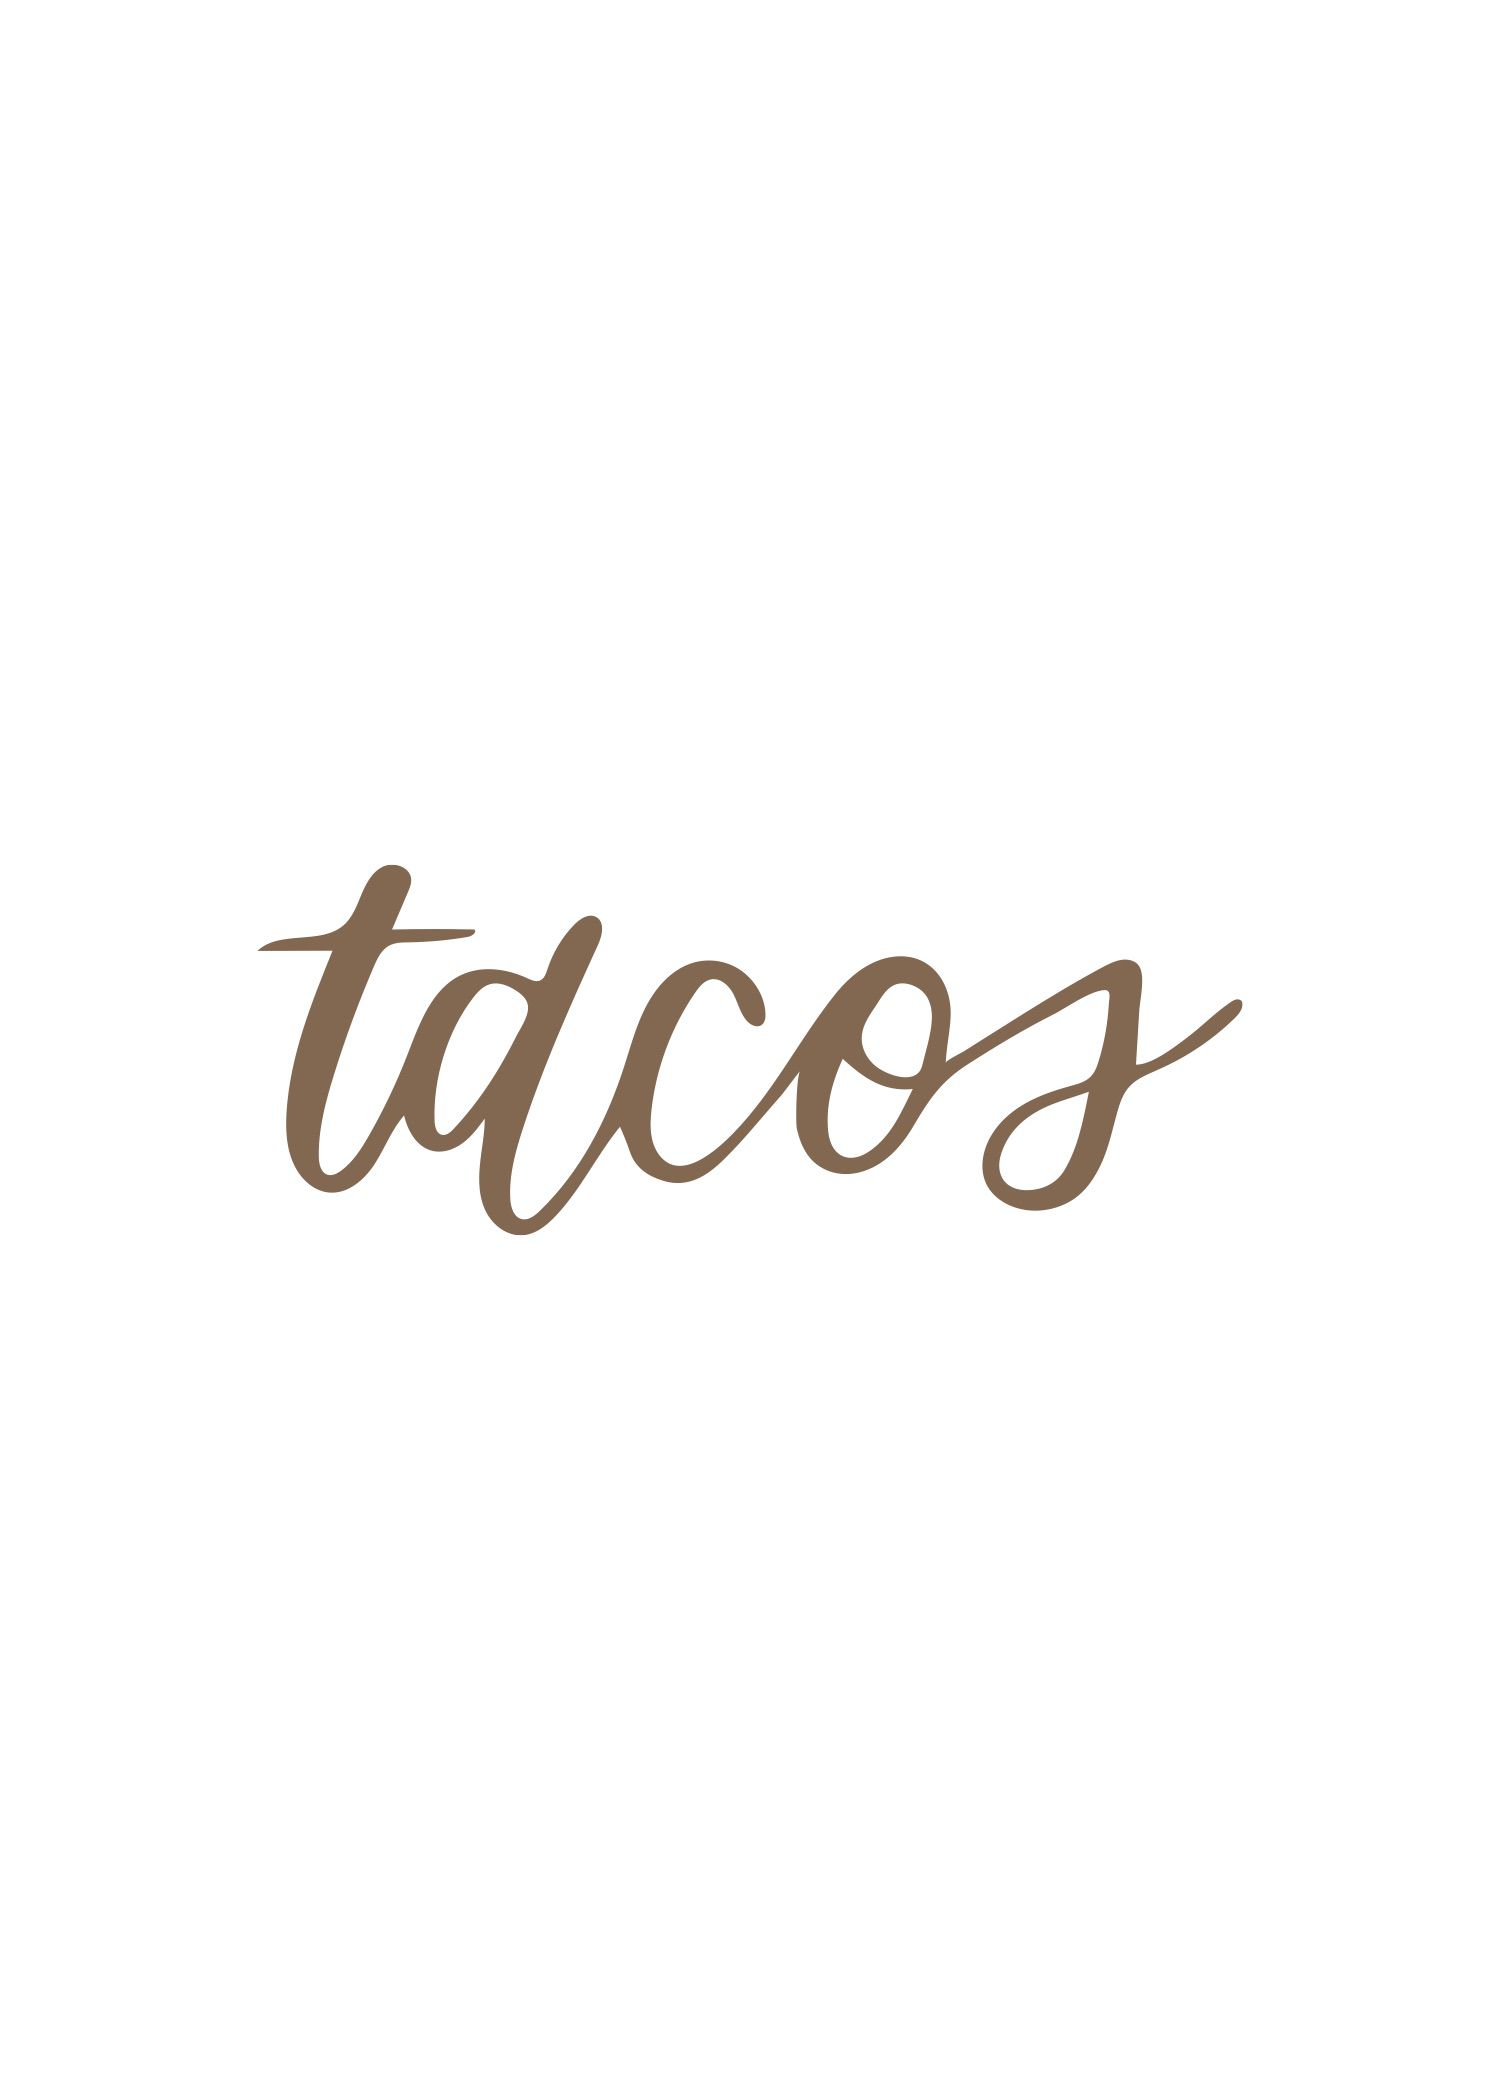 "tacos" calligraphy